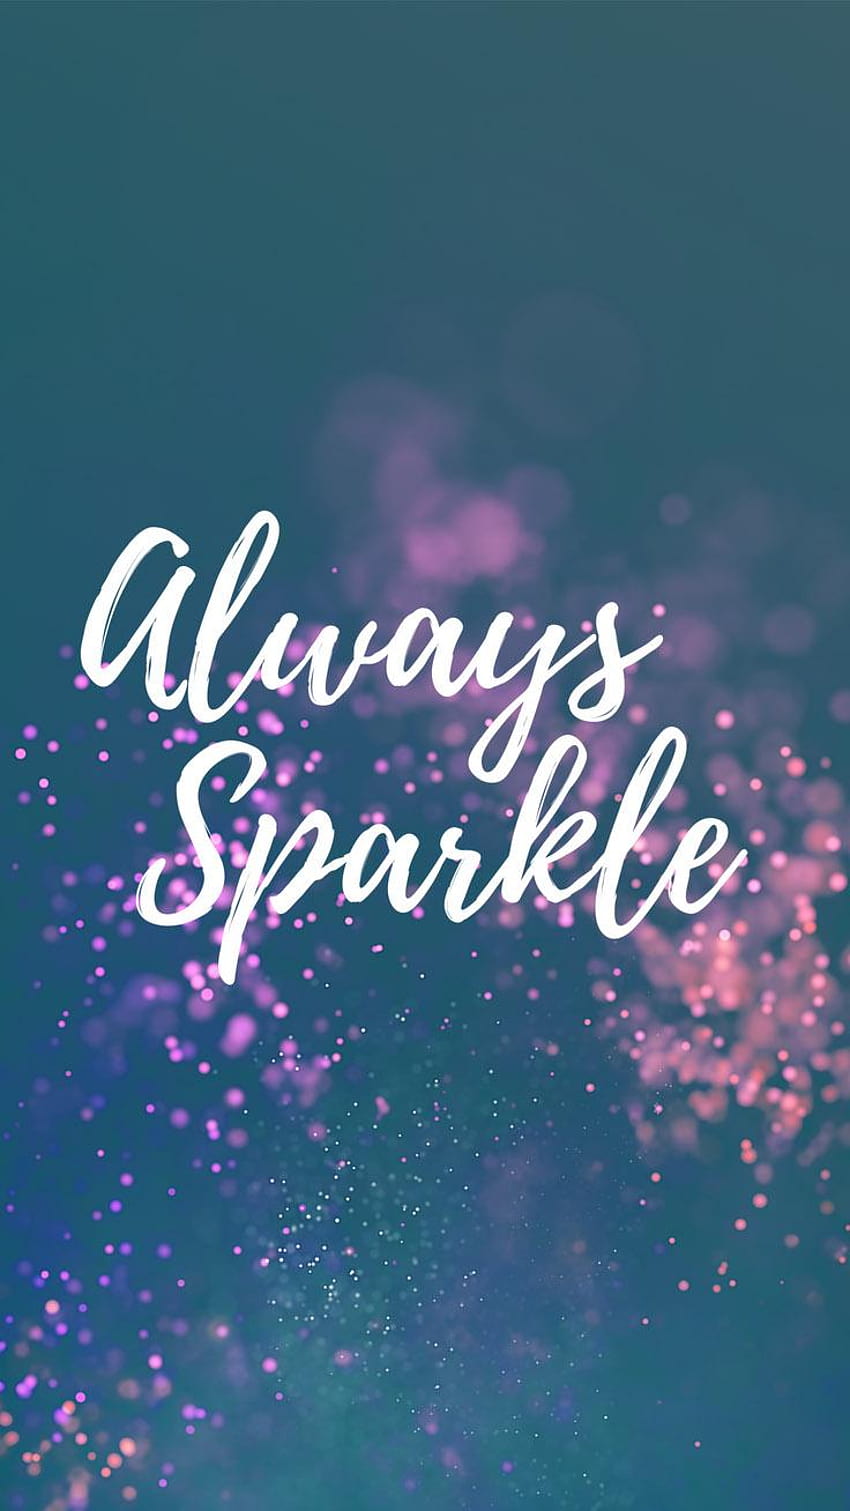 Inspirational Quotes Iphone Always Sparkle, inspiring quotes HD phone wallpaper